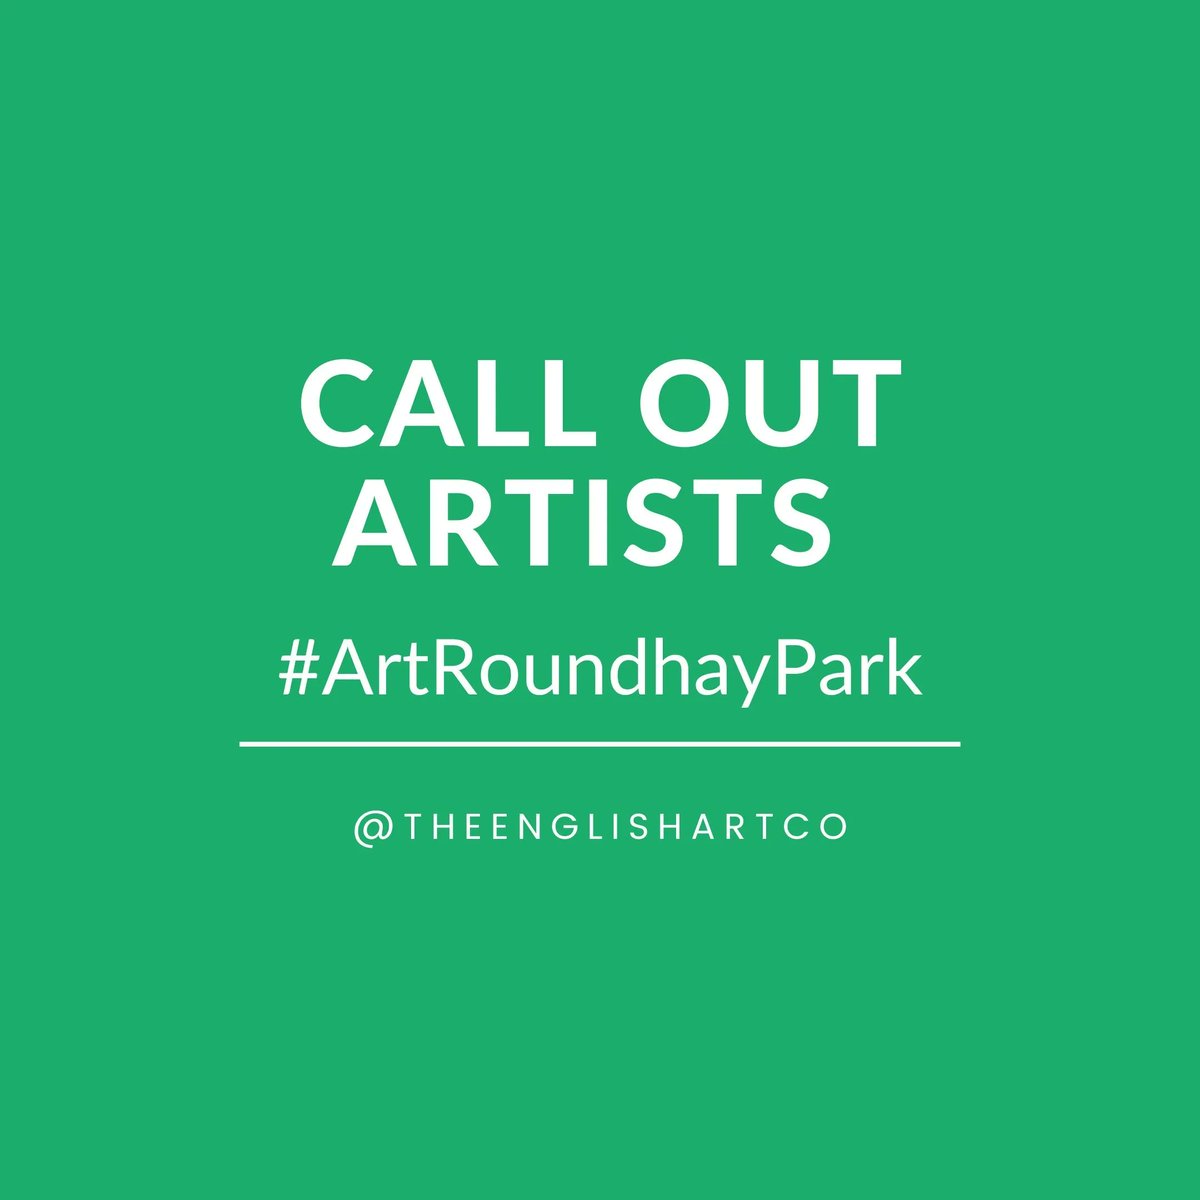 CALL OUT ARTISTS // SOON ! 

Keep an eye out for our latest call out - we’ll be opening out for submissions soon.

Deadline: 5.7.23

buff.ly/3oZIvFK

#artistcallout #ArtRoundhayPark #RoundhayPark #Leeds #newexhibition #visitleeds #ceramics #art #abstract #mixedmedia